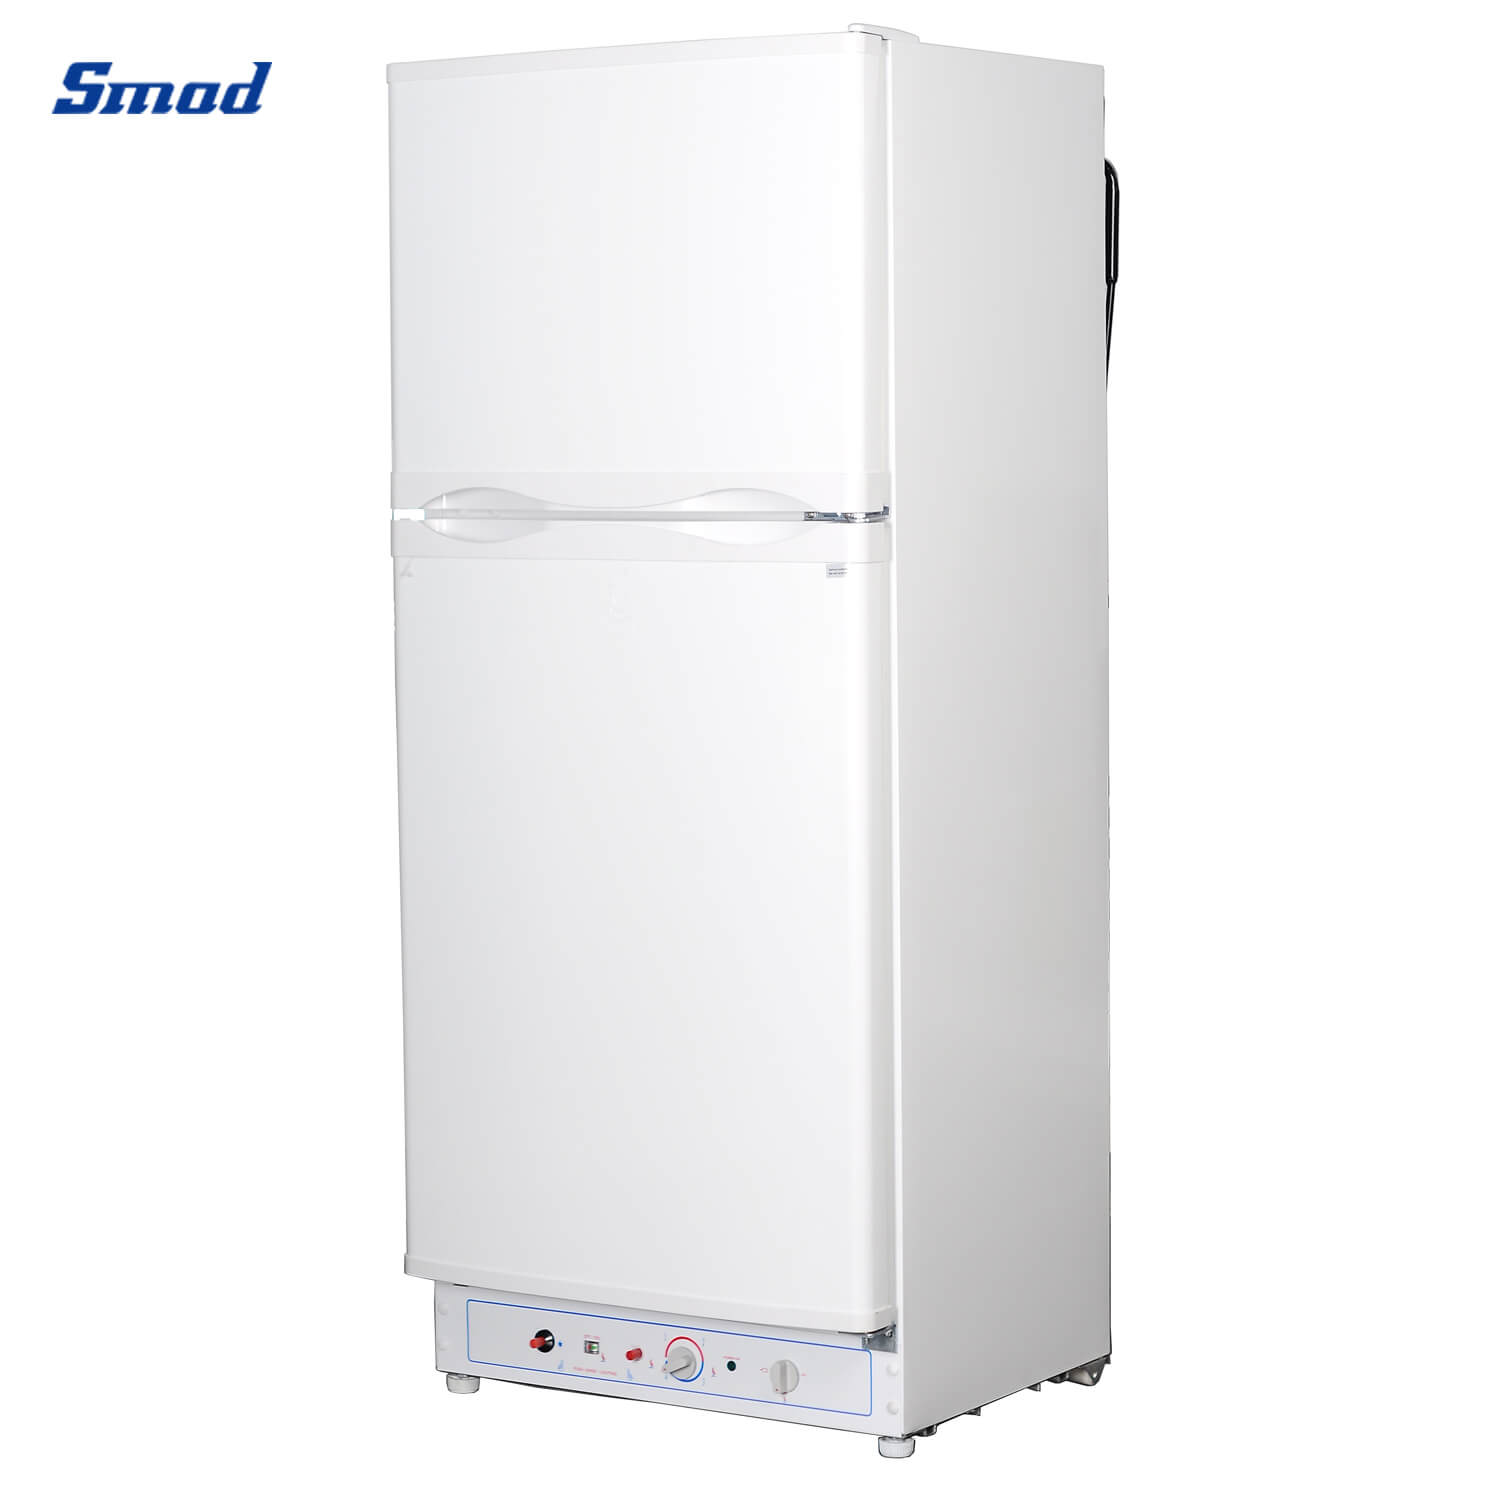 
Smad 225L Gas / Electric Double Door Fridge Freezer with Low Working Noise